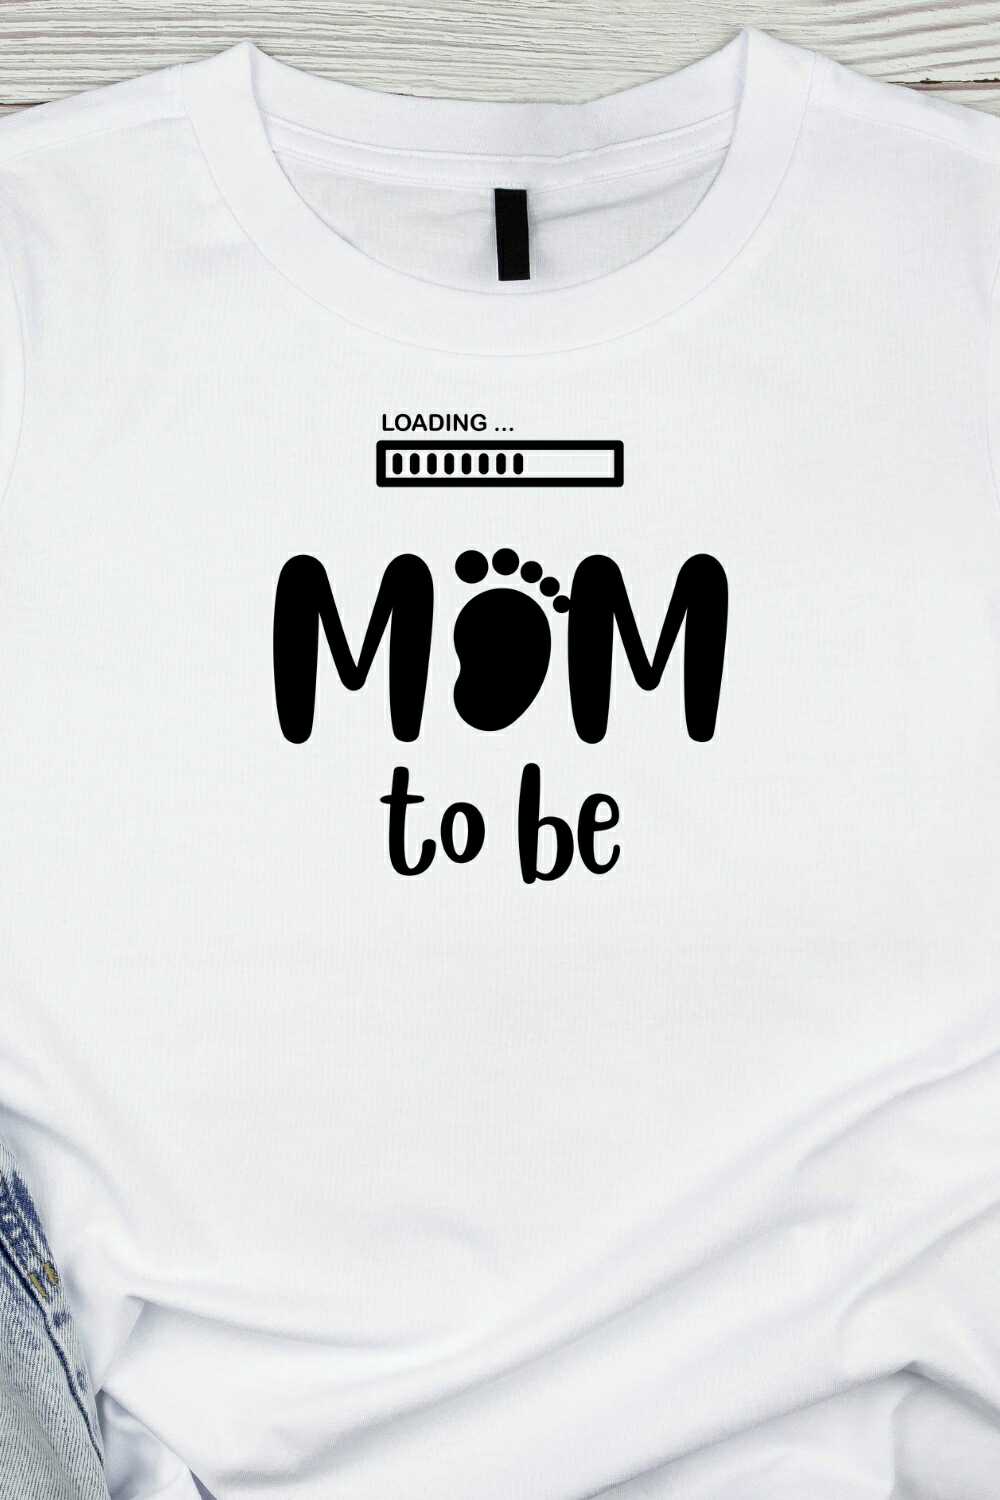 Mom Favourite- T-shirt Design Loading Mom To Be pinterest preview image.